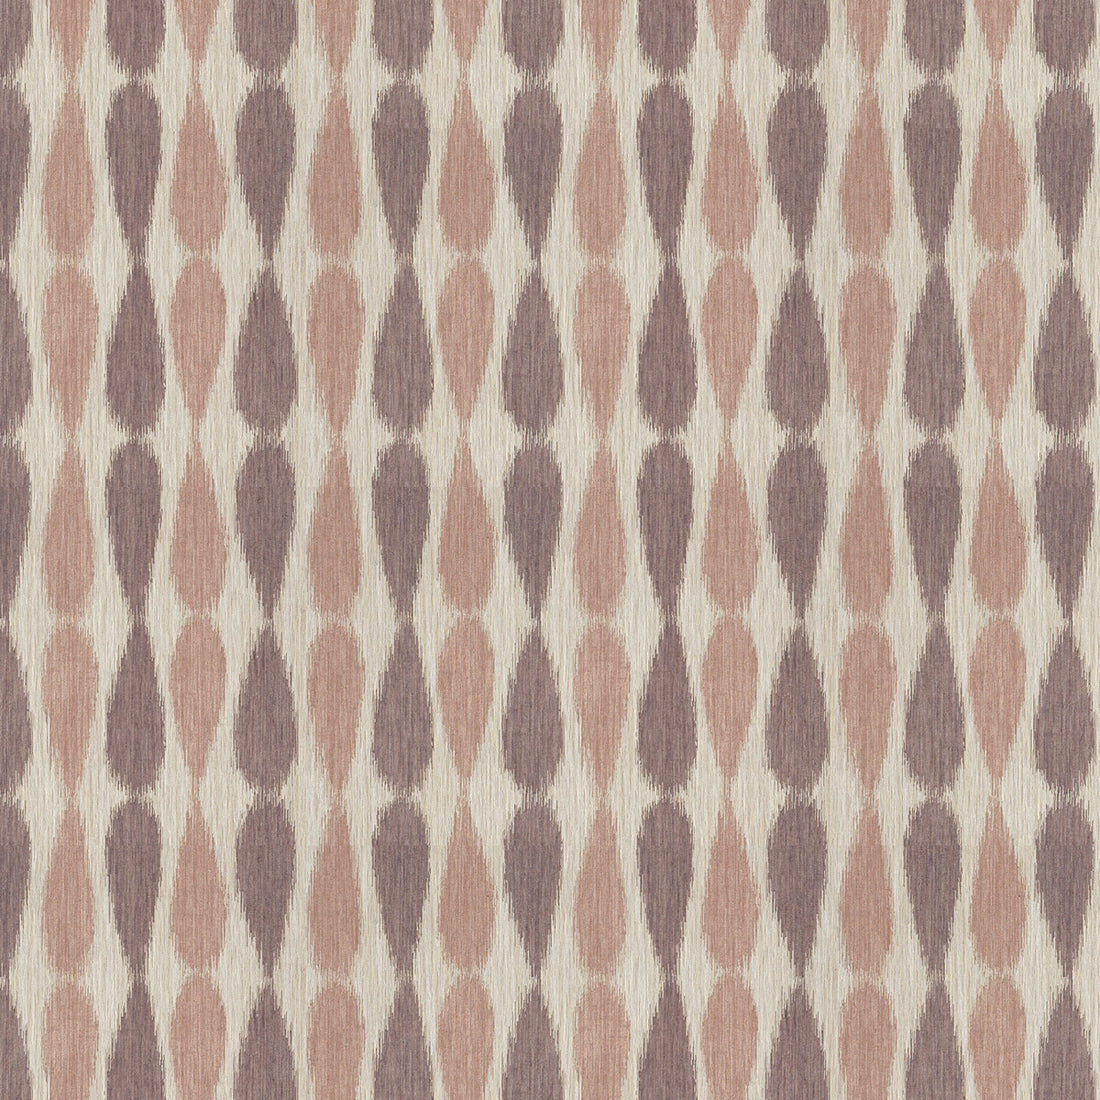 Ikat Drops fabric in lilac color - pattern GWF-2927.10.0 - by Lee Jofa Modern in the Allegra Hicks II collection